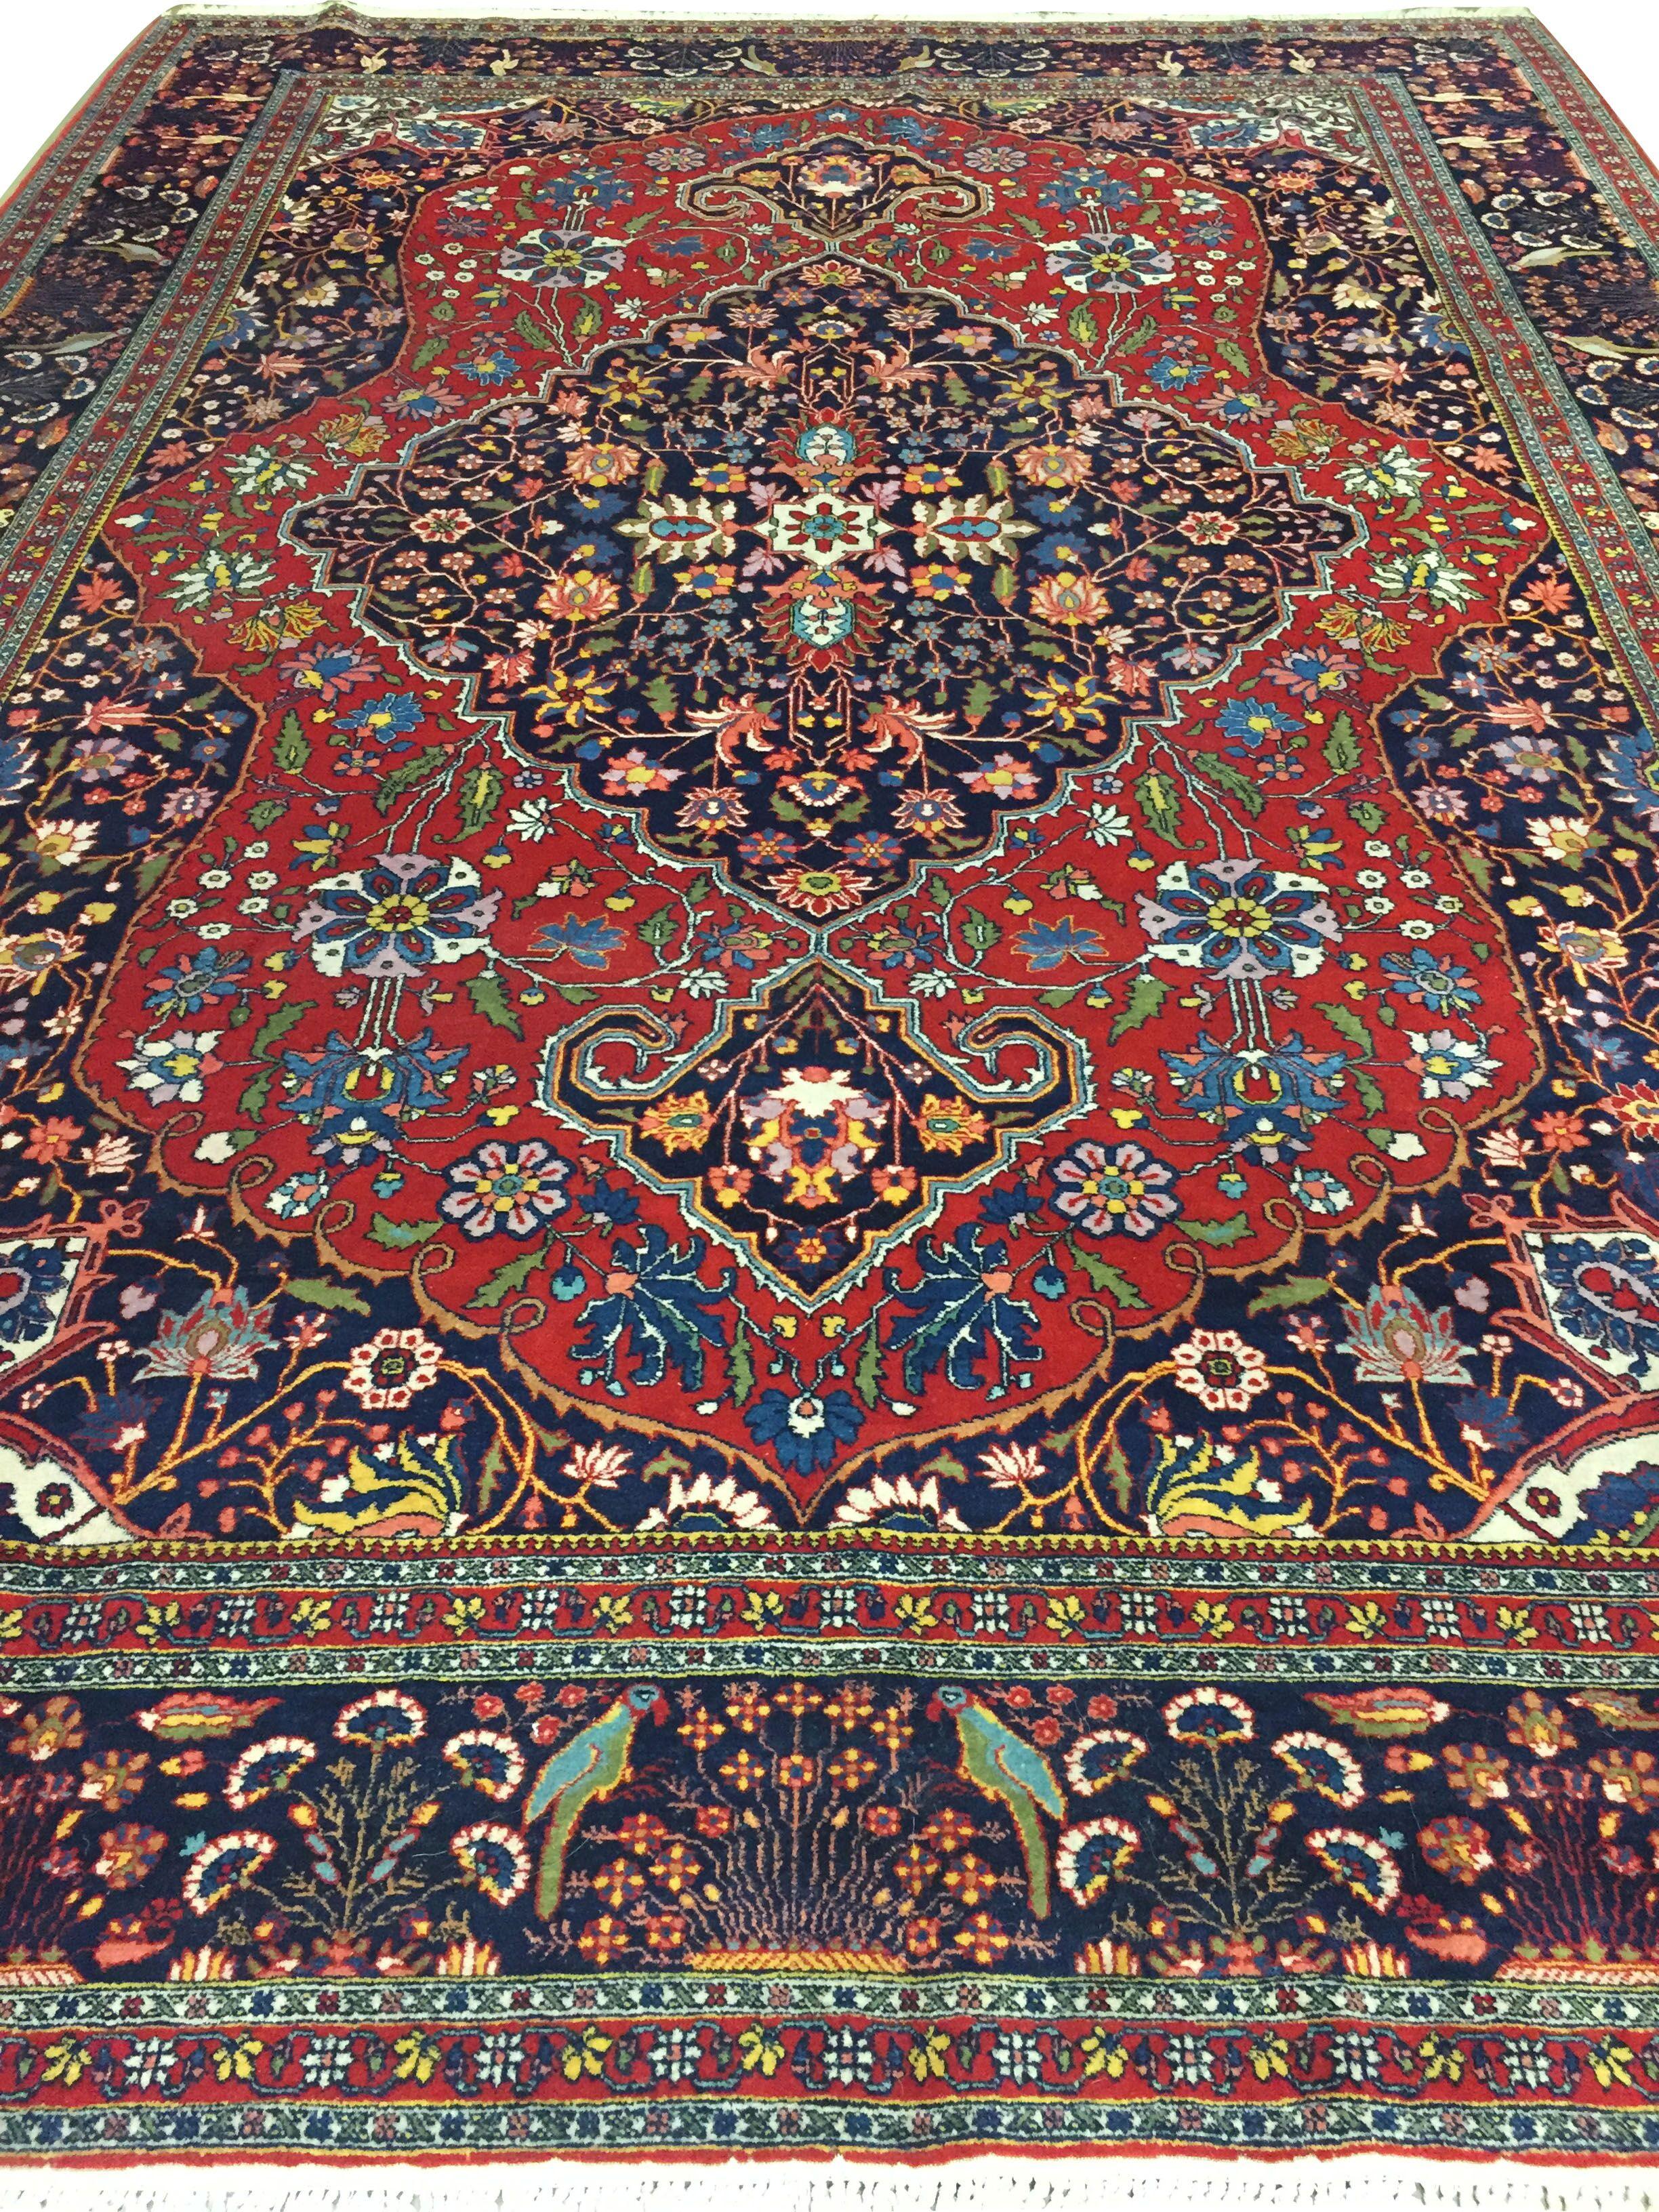 Vintage Persian Tabriz Carpet Rug  8'6 x 11'6 In Good Condition For Sale In New York, NY